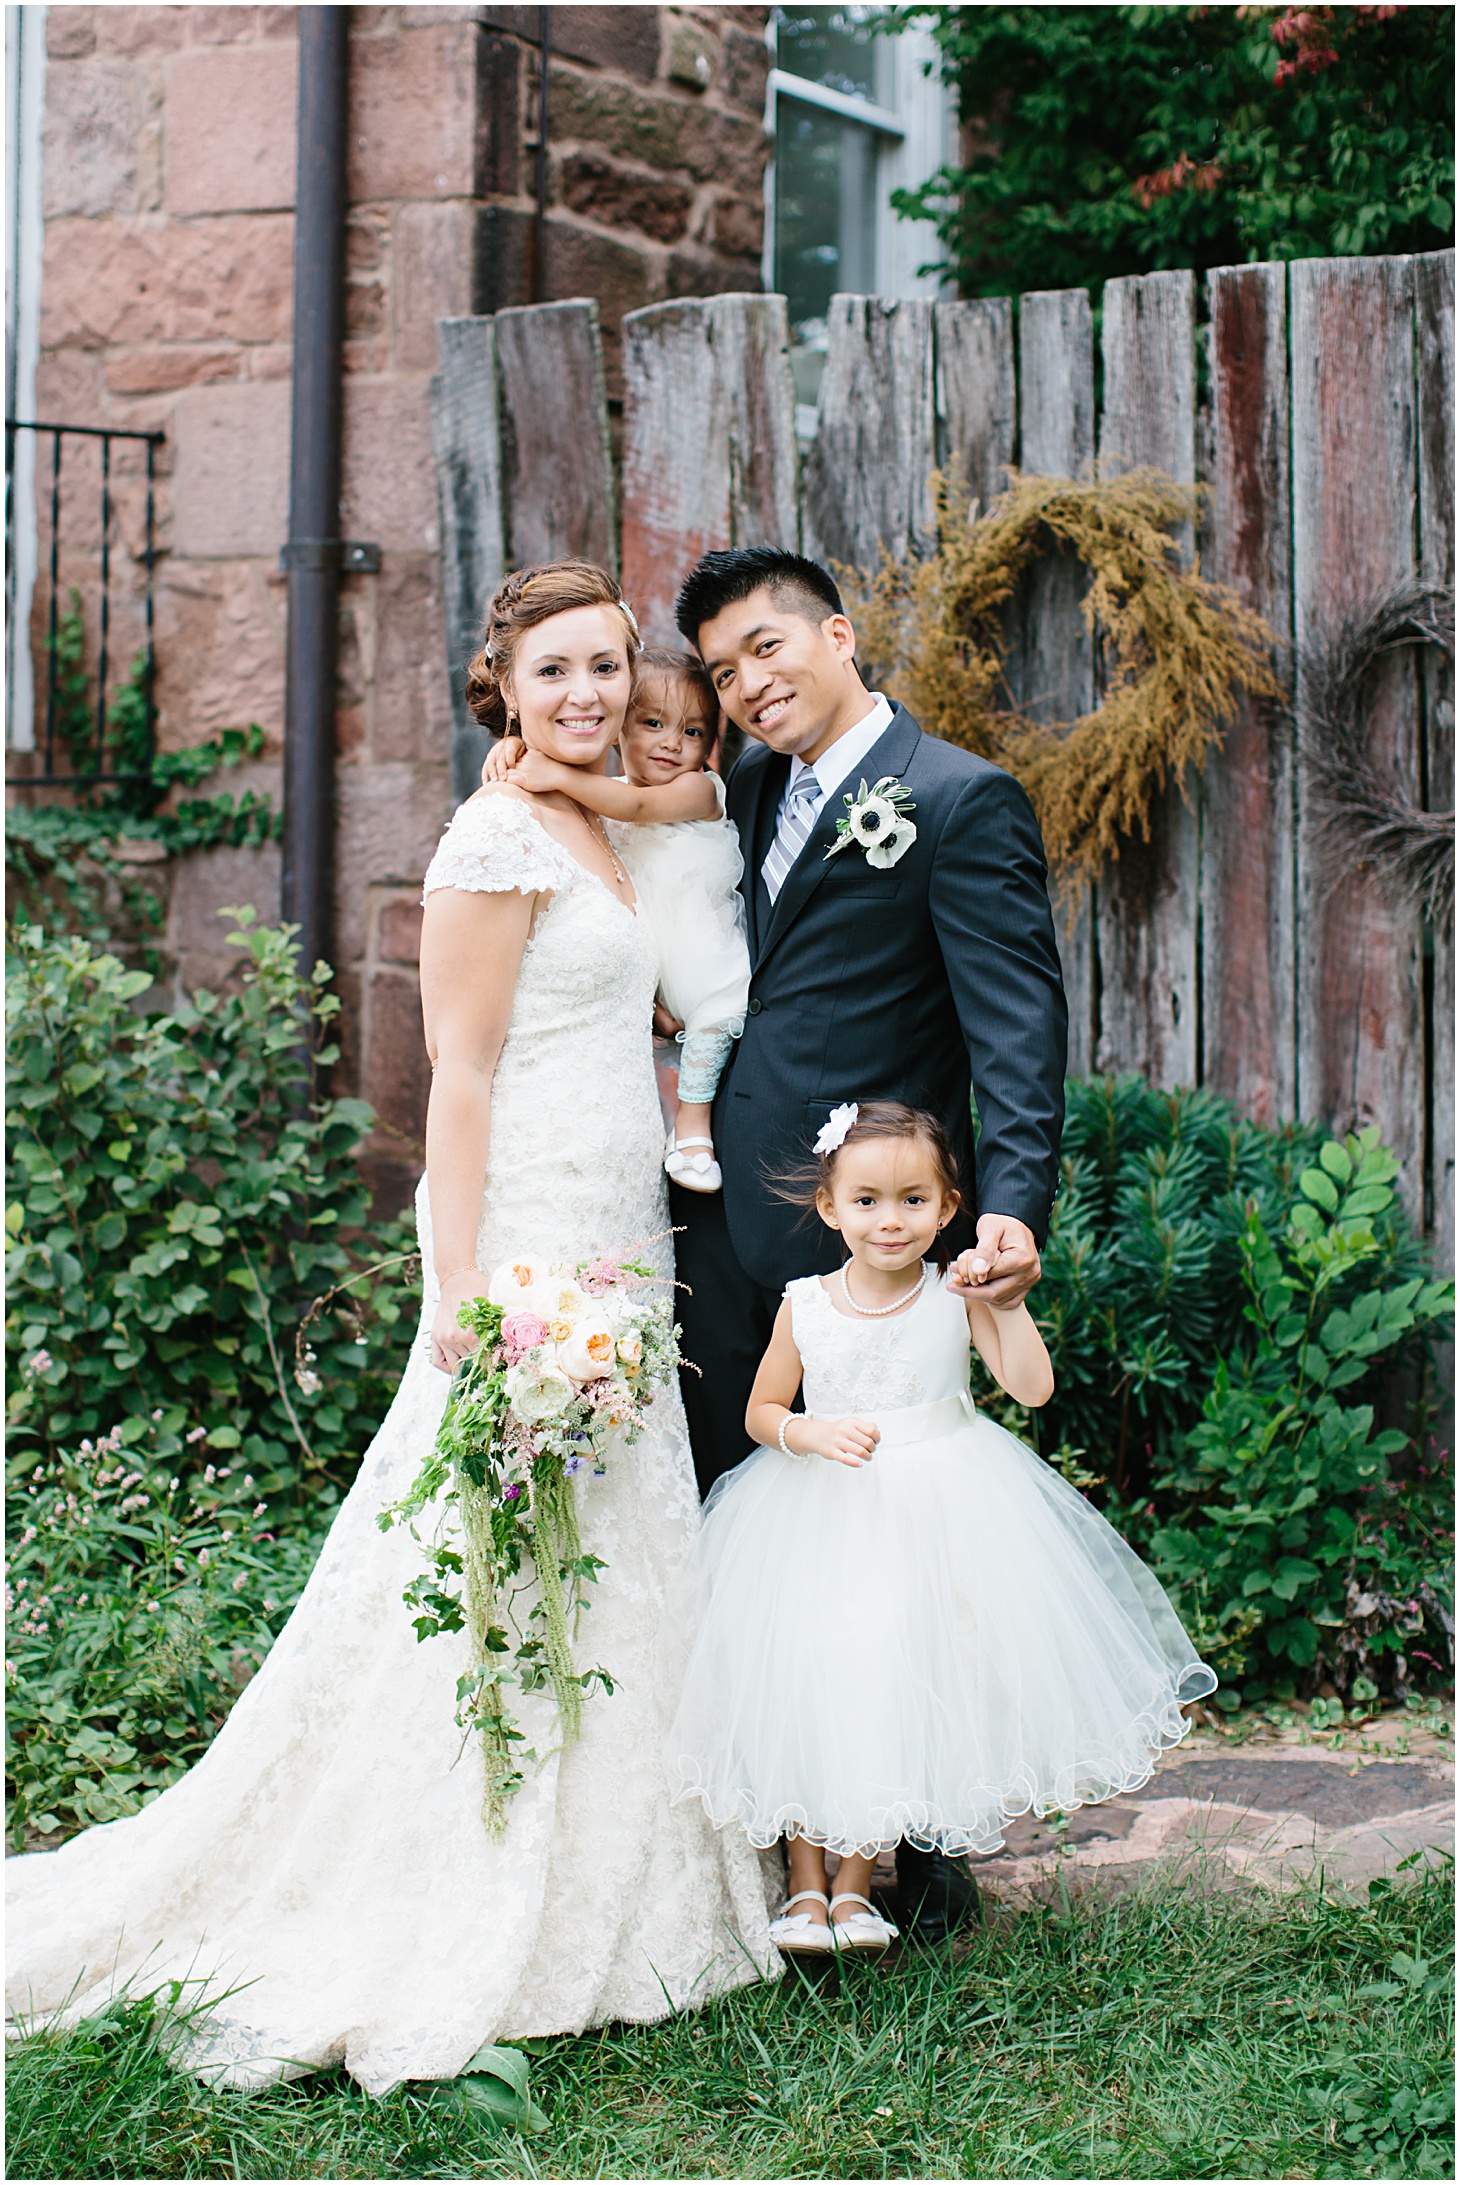 Rustic Floral Wedding at Rocklands Farm & Winery by Sarah Bradshaw Photography_0019